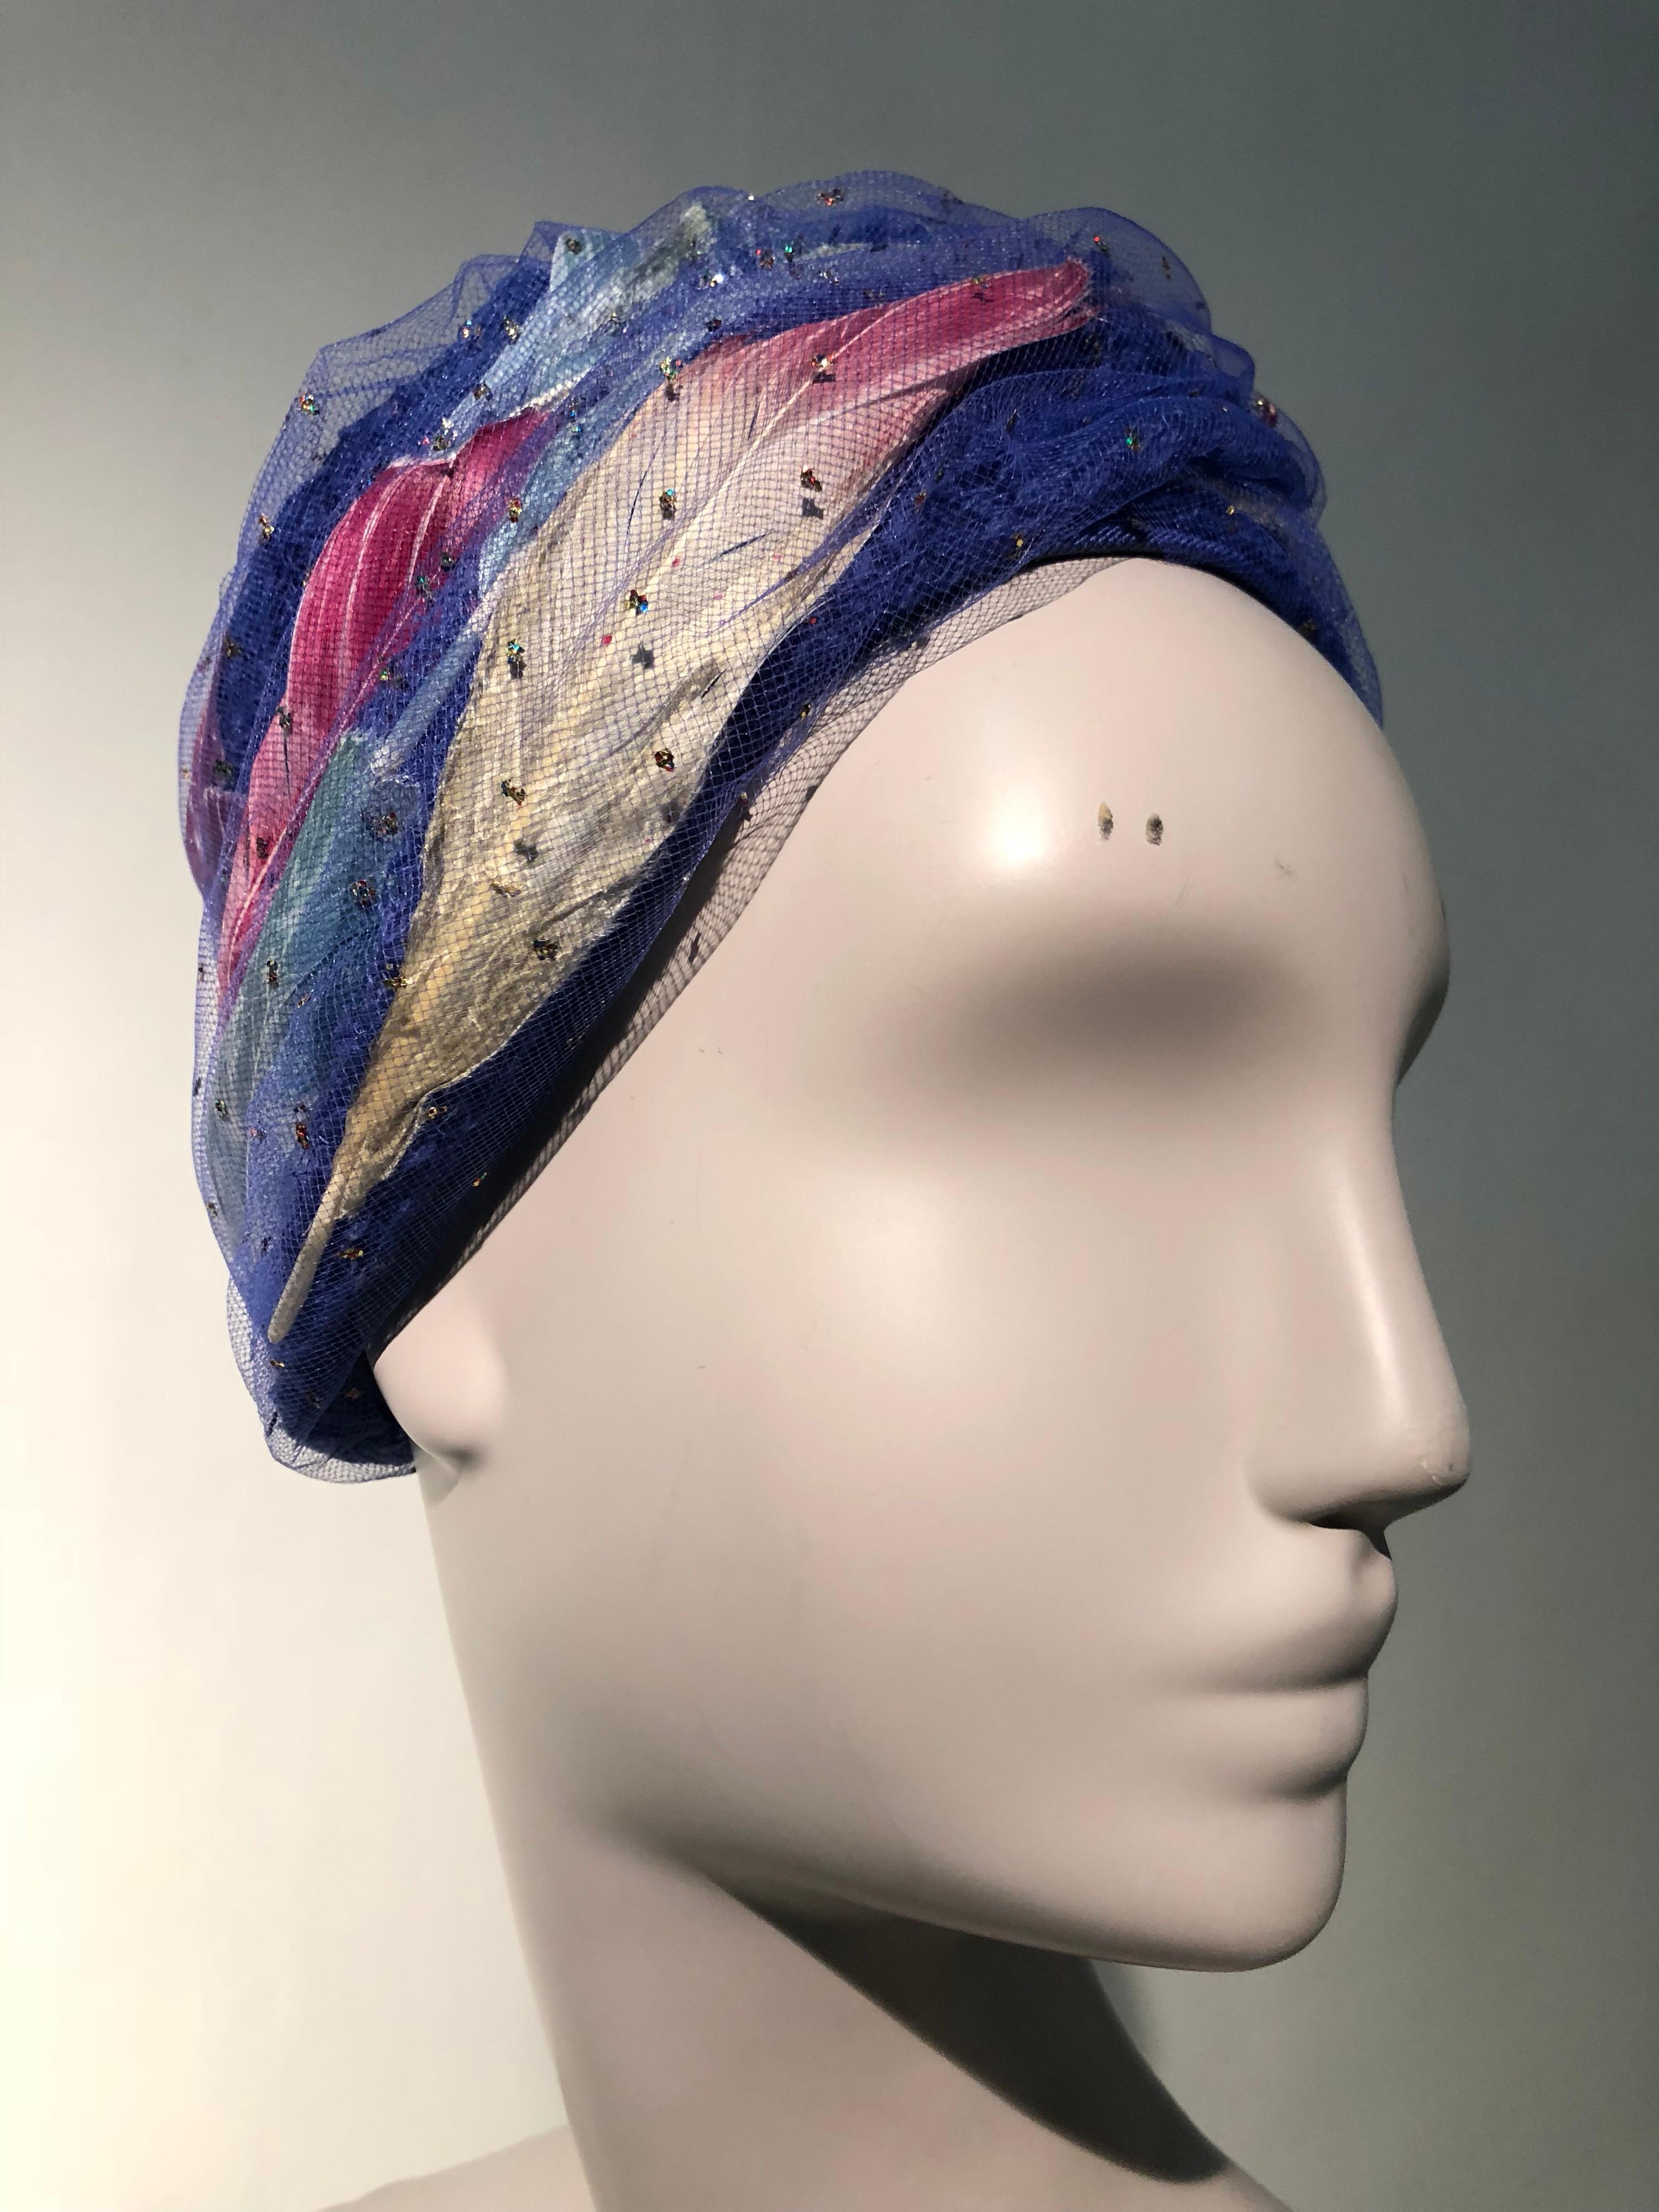 Gray 1960s Christian Dior Cobalt Blue Turban-Style Hat W/ Pink White & Blue Feathers